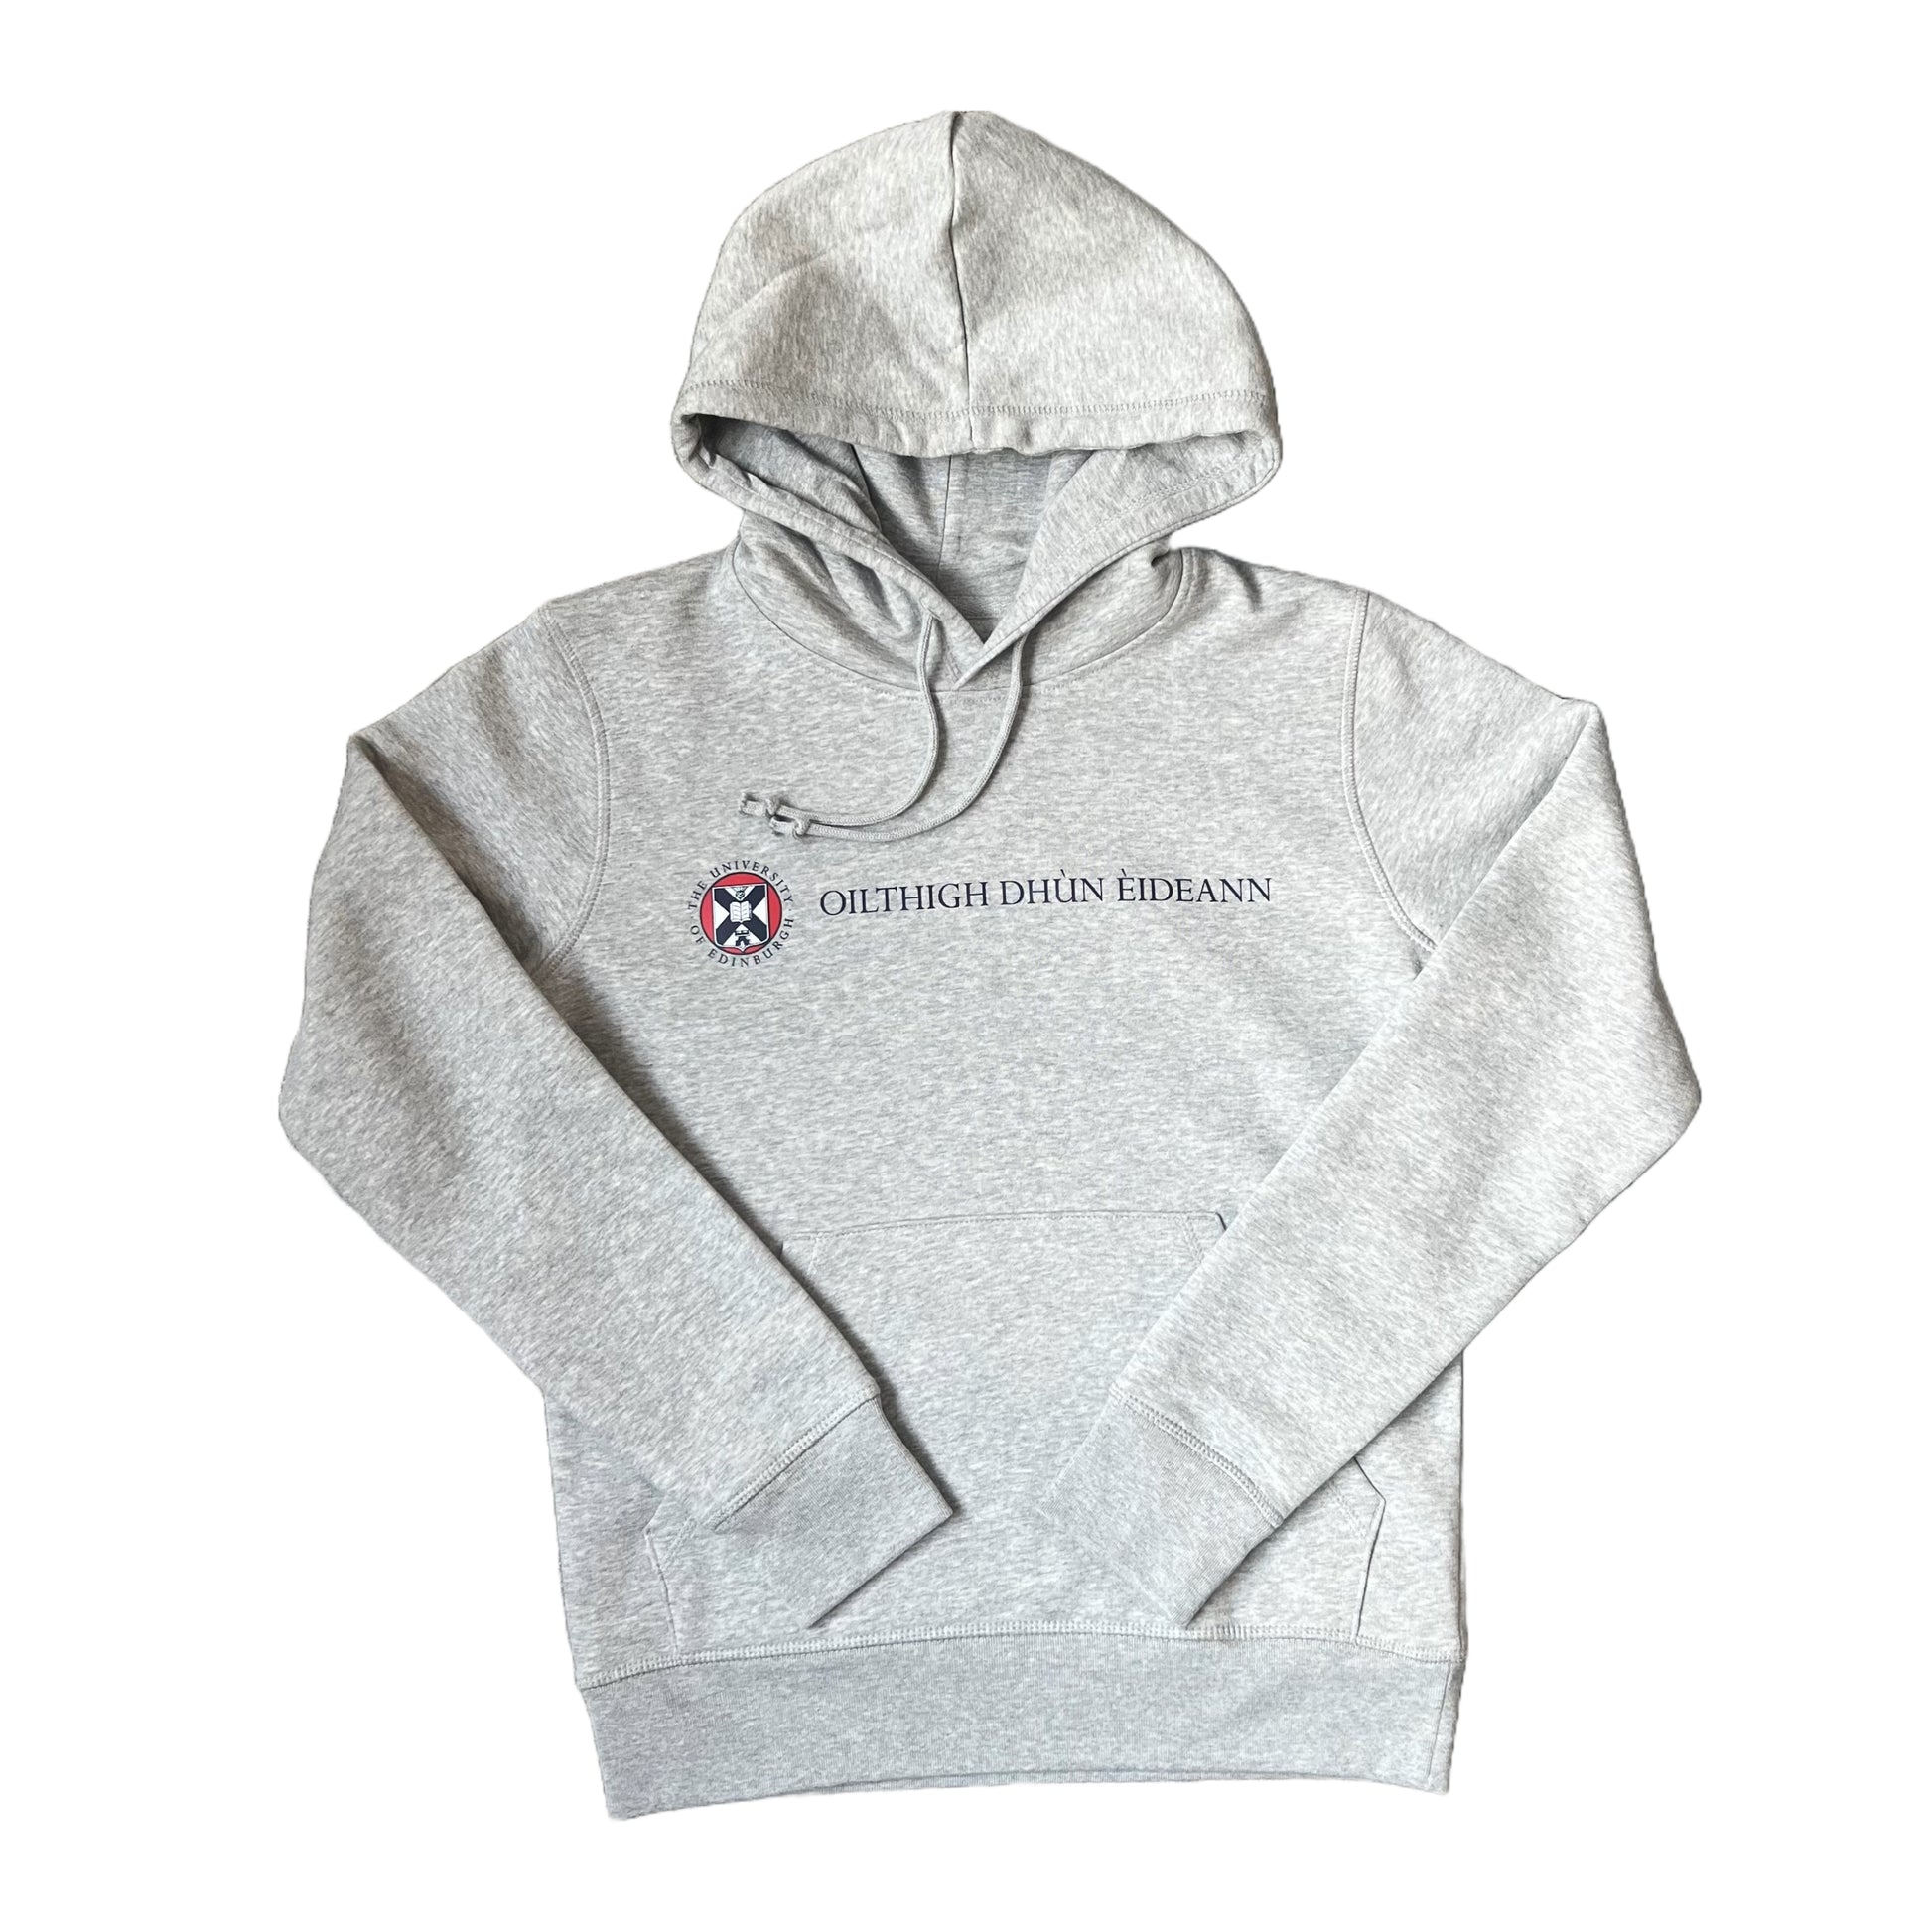 Grey hoodie with the University name in Gaelic in navy print and university crest in navy red and white print